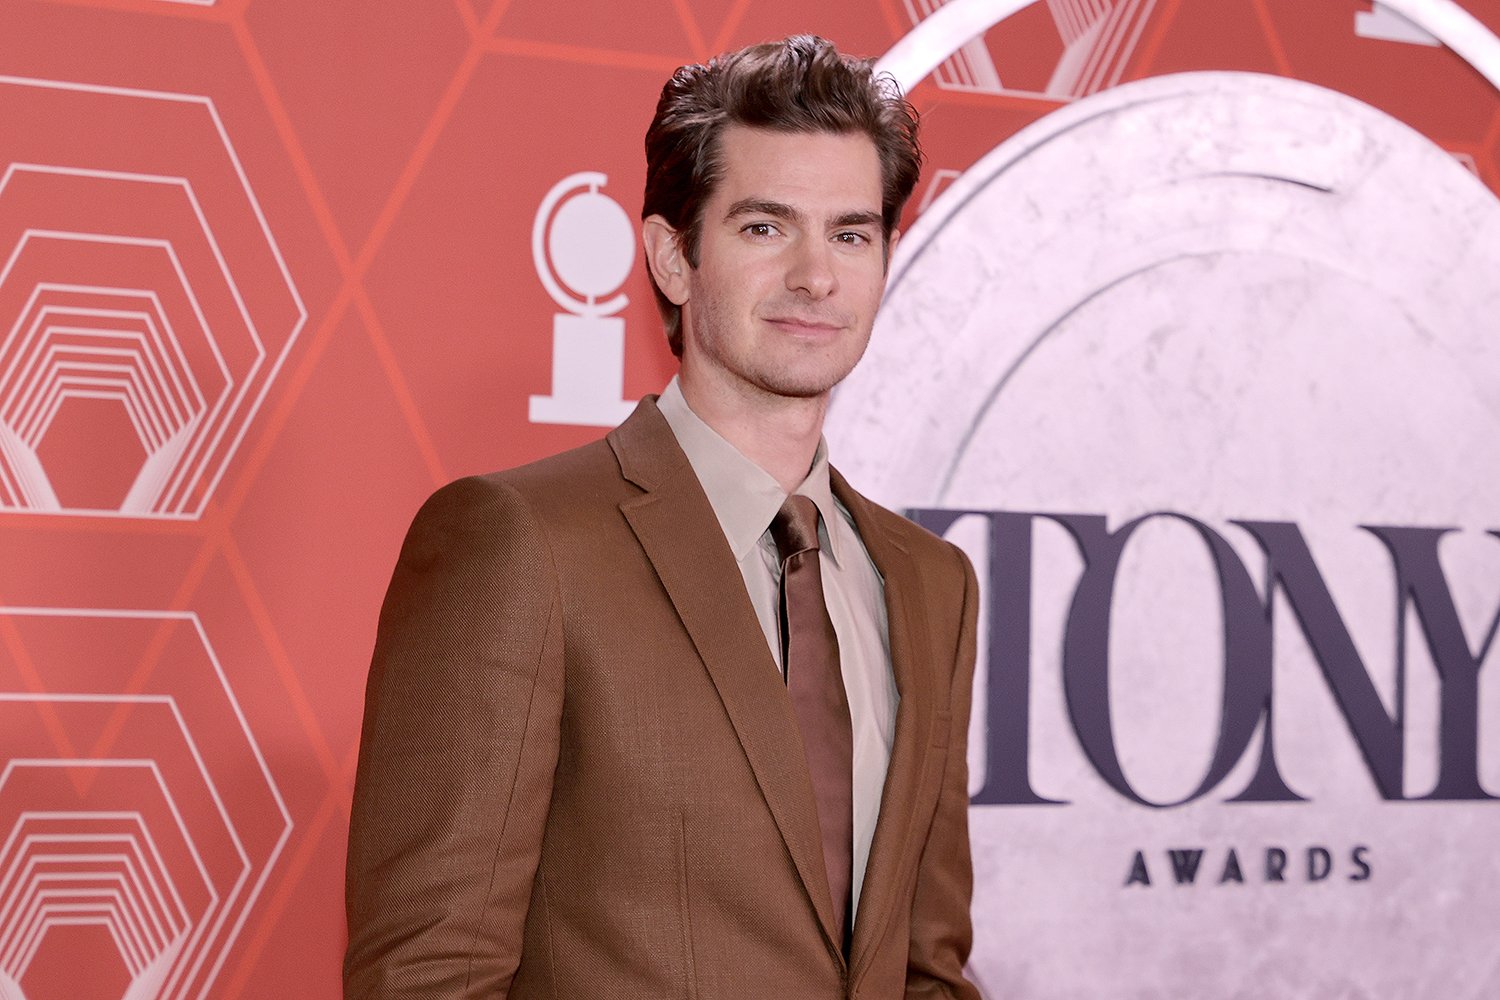 The Amazing Spider-Man star Andrew Garfield attends the 74th Annual Tony Awards